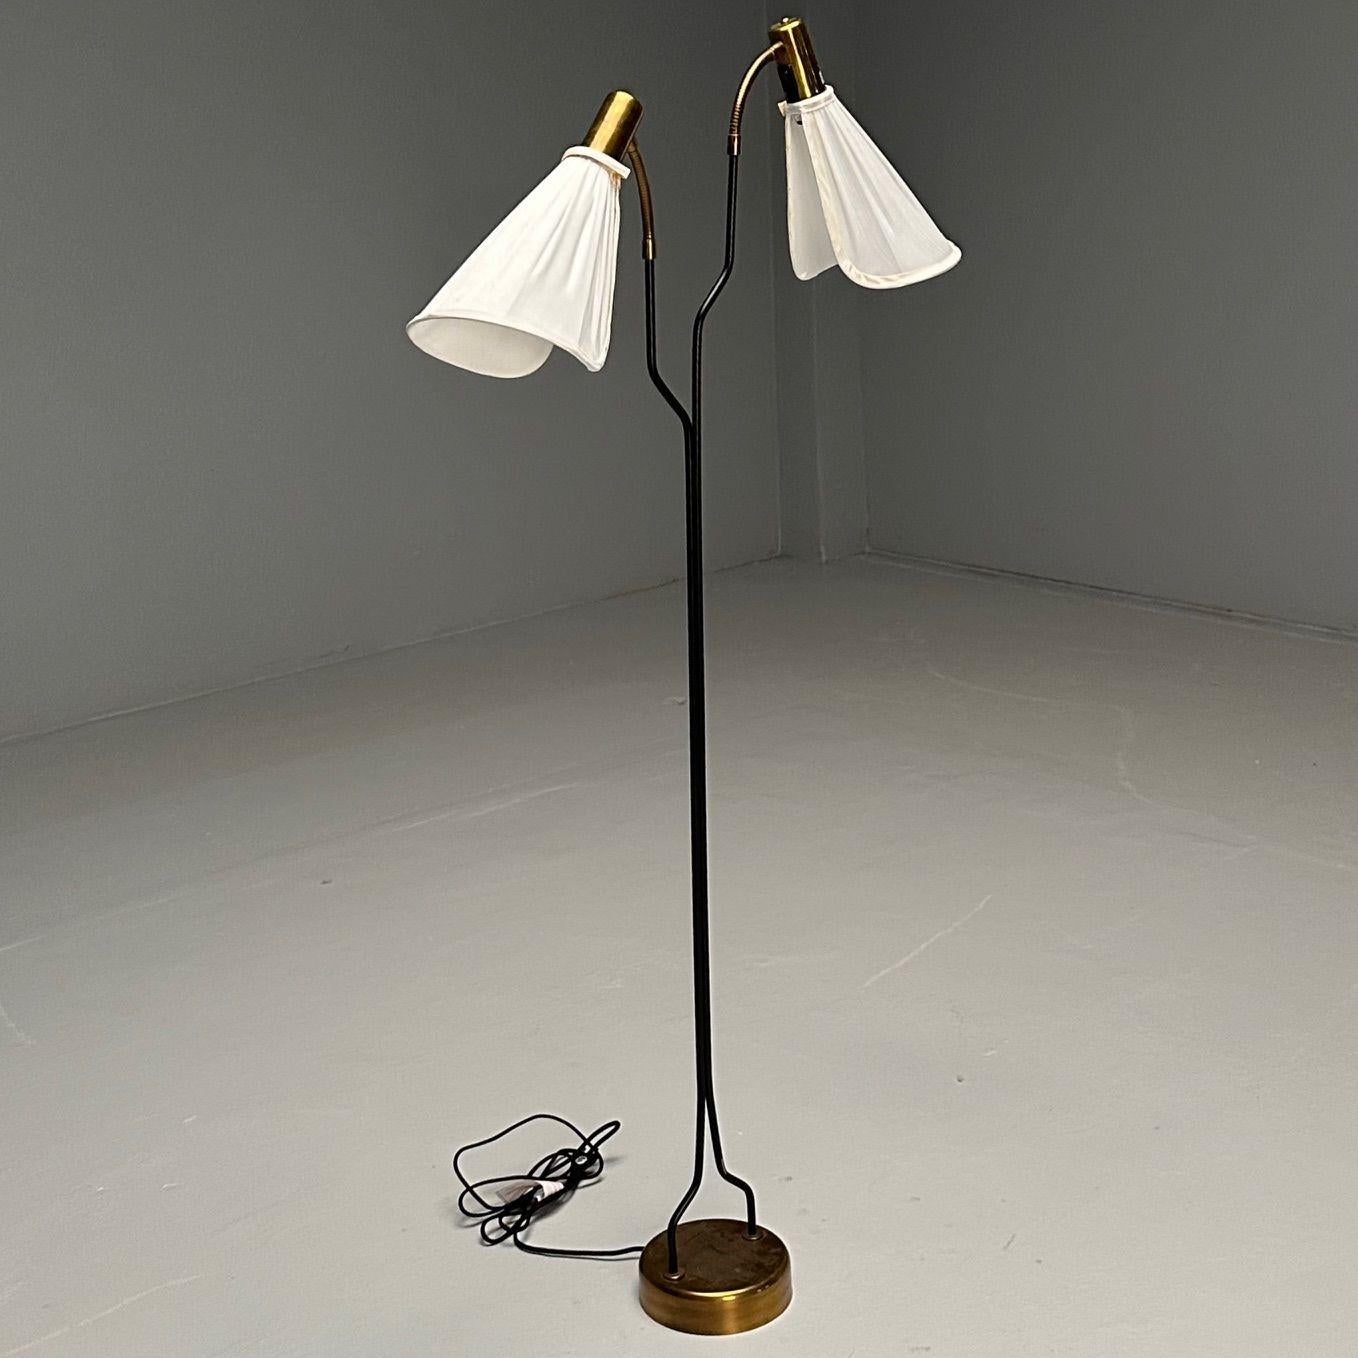 Contemporary Swedish Mid-Century Modern, Organic Floor Lamp, Black Lacquer, Sweden, 2000s For Sale